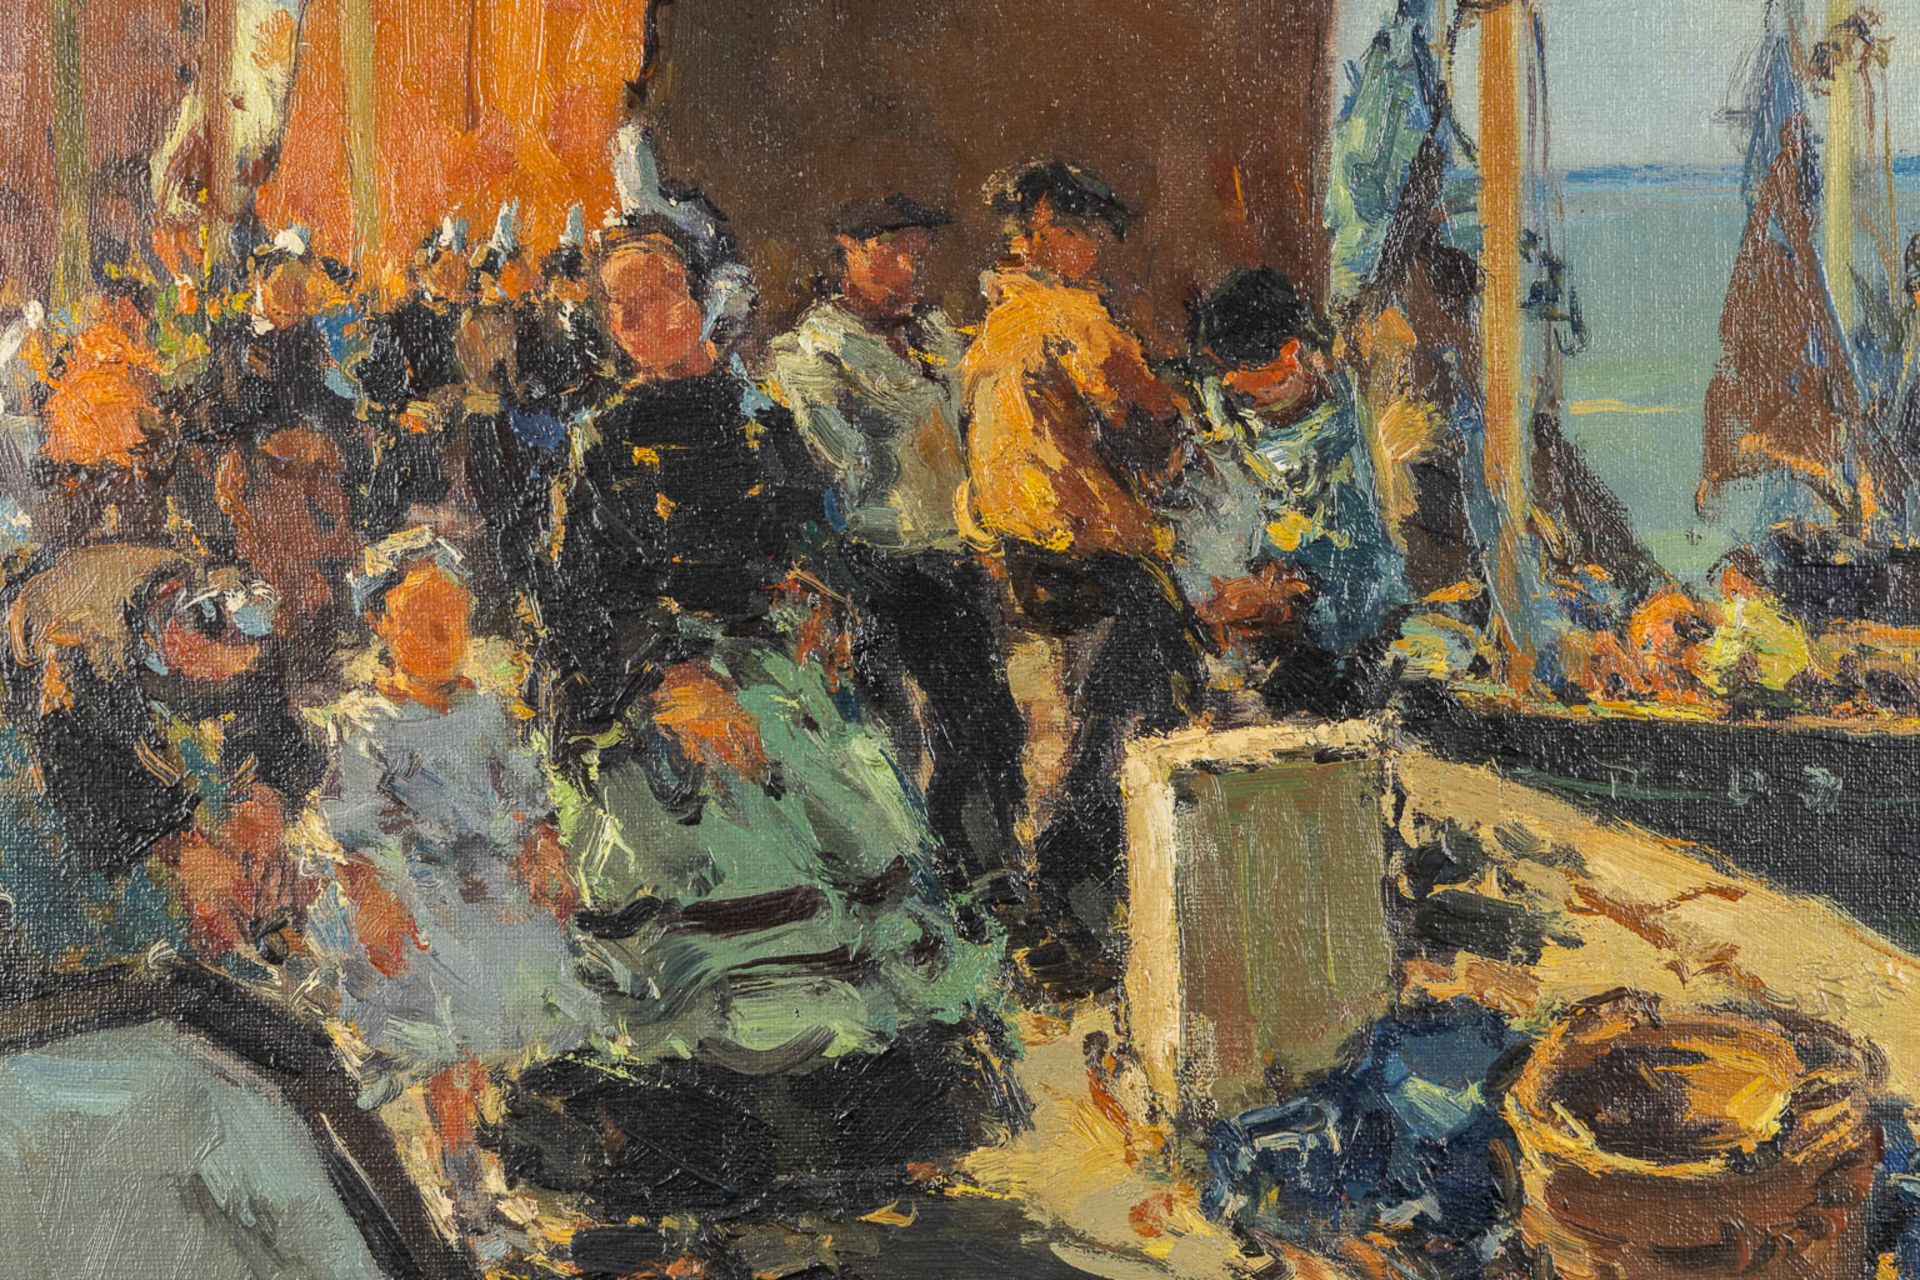 Jacques DE CHASTELLUS (1894-1957) 'On the dock' oil on canvas. (W:67 x H:65 cm) - Image 4 of 6